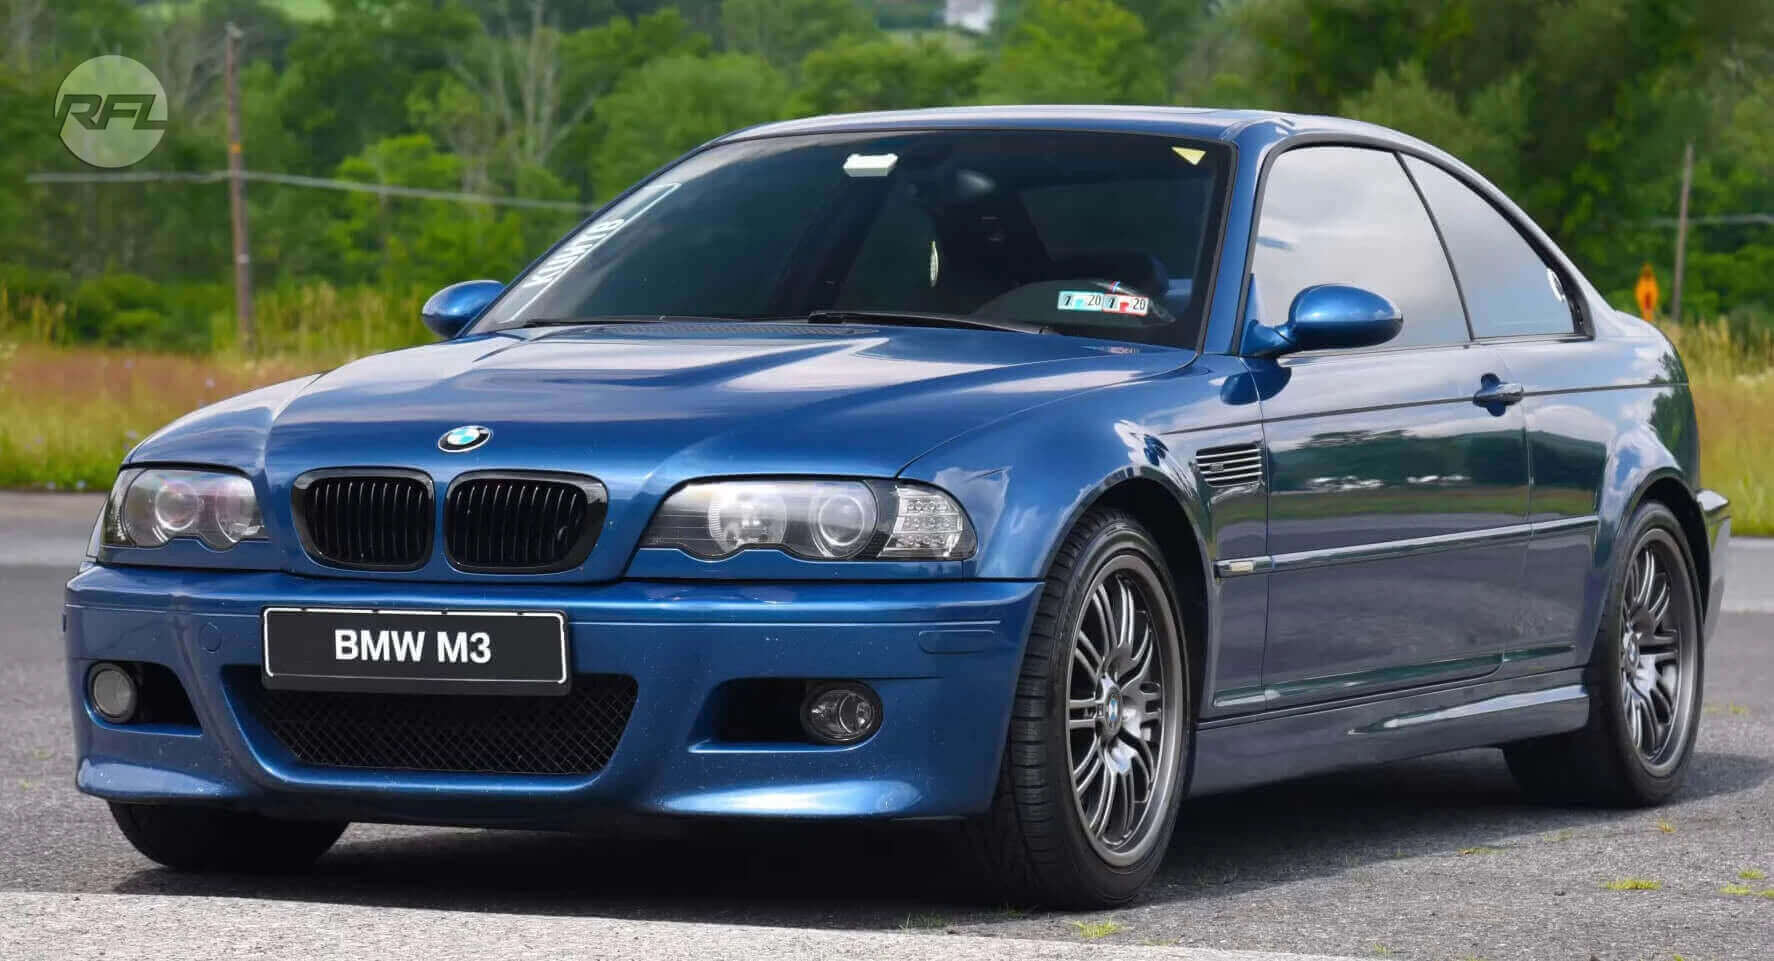 The BMW E46 Is Still Good Two Decades Later - BMW E46 325Ci Msport Review 